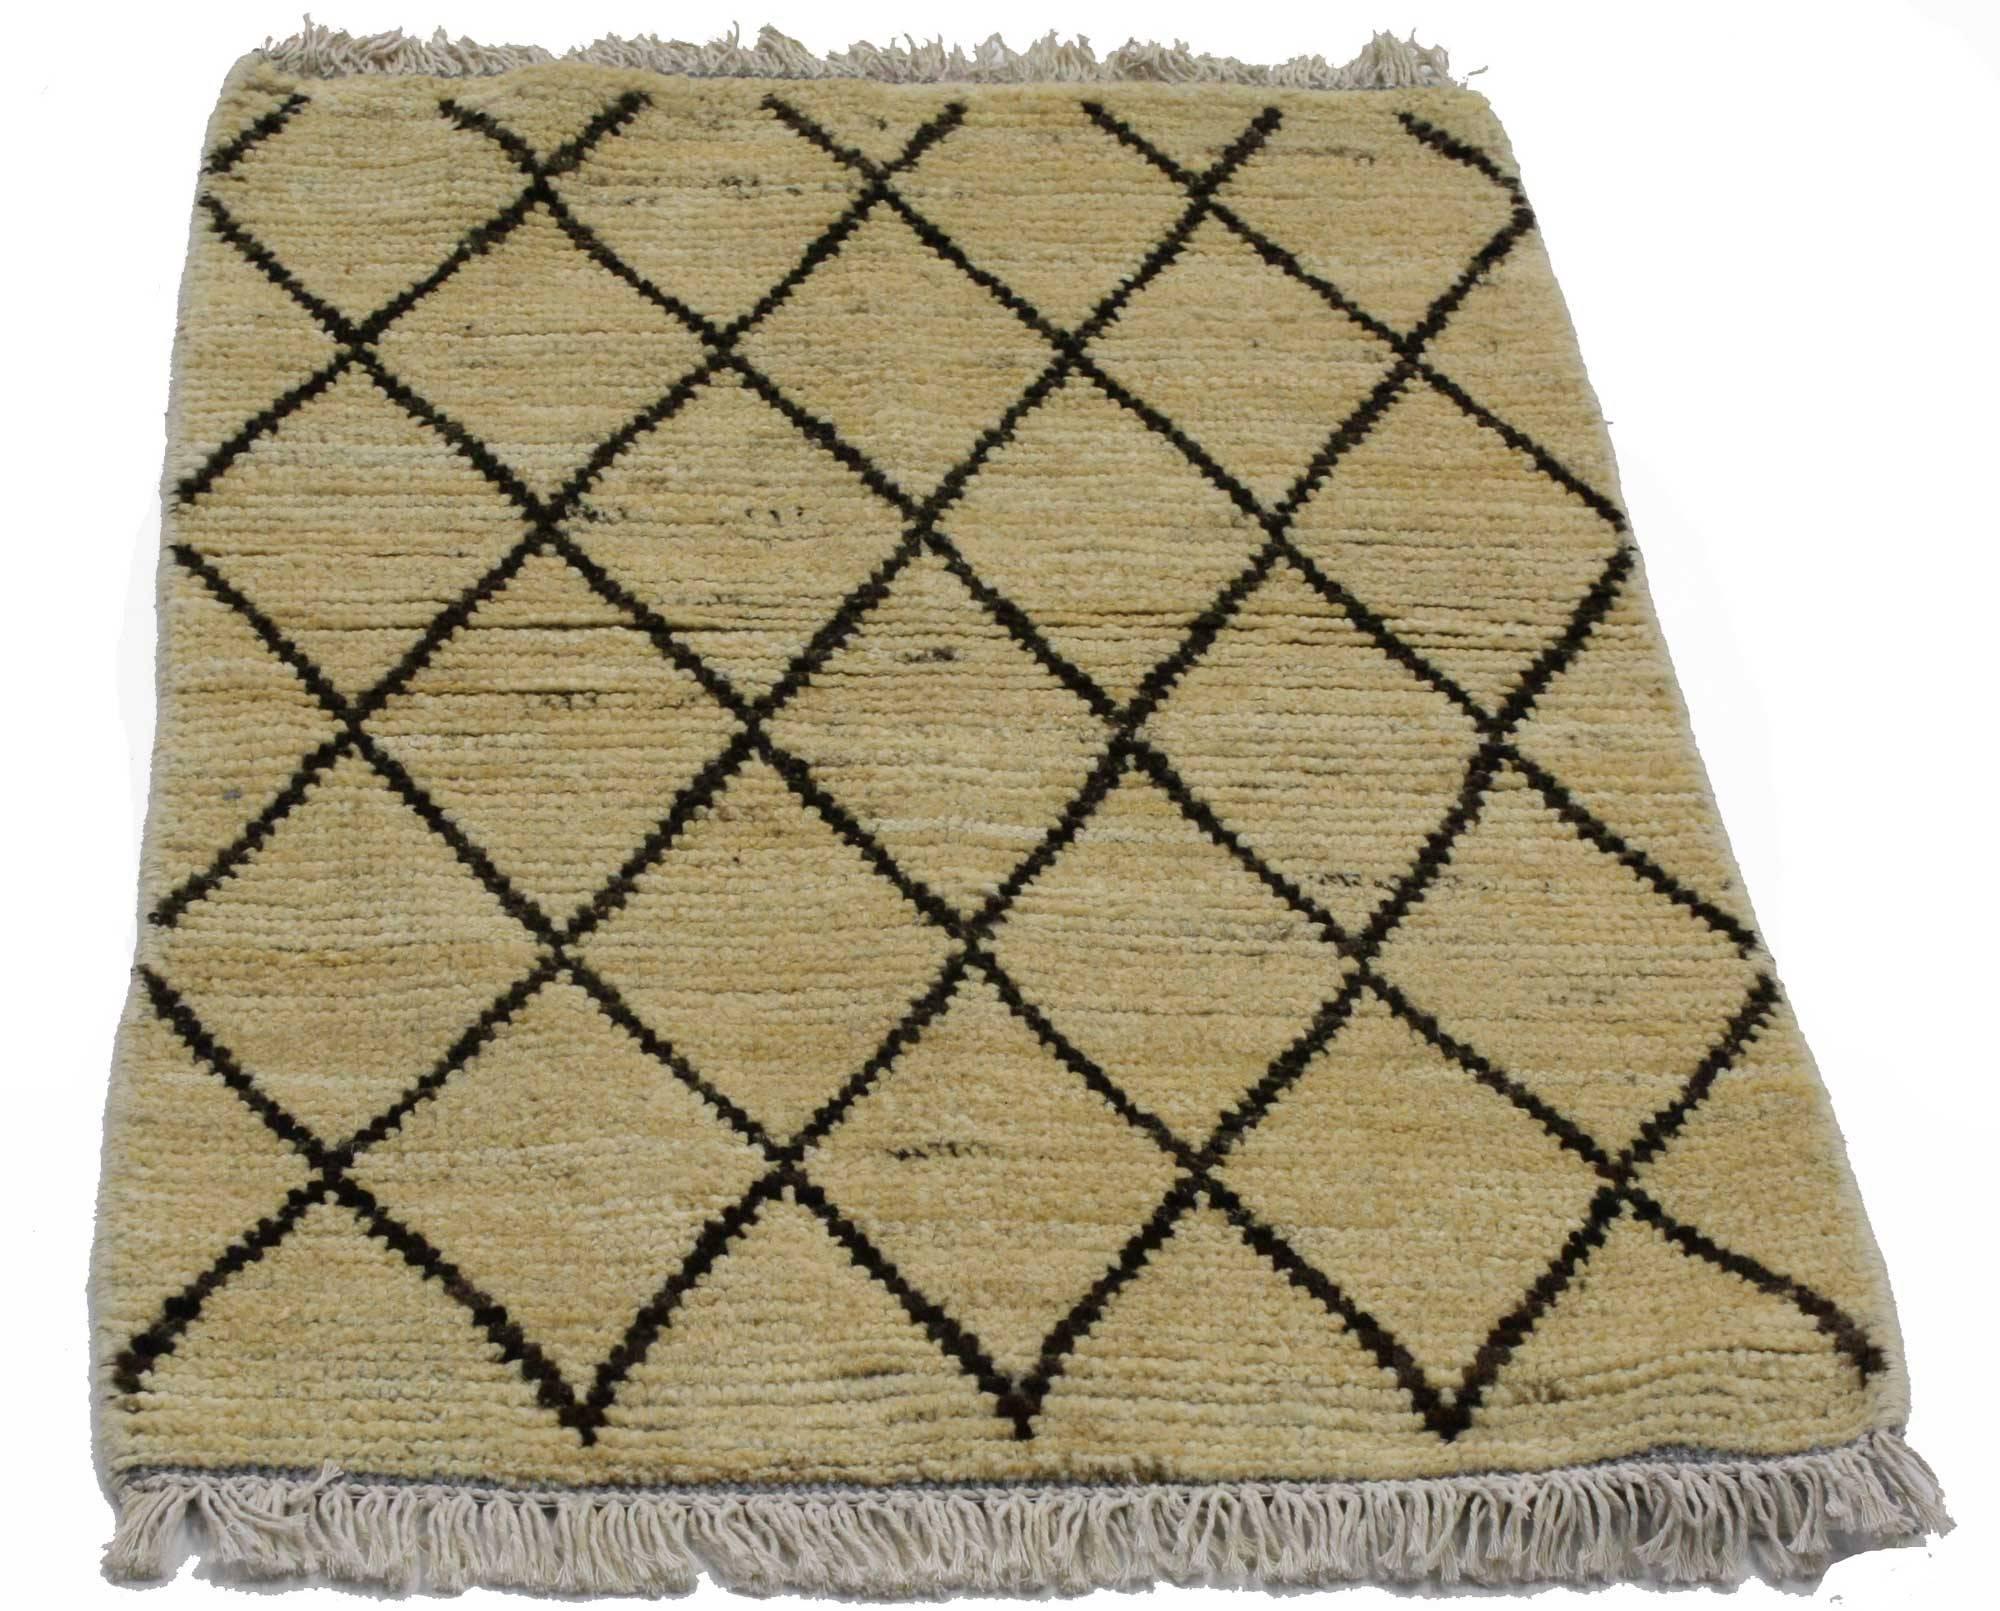 76717 Modern Moroccan Style Accent Rug. With its minimalist design aesthetic, this hand-knotted wool Moroccan style accent rug can harmonize disparate elements, bring soothing serenity while adding texture and depth to a space. This is a wonderful